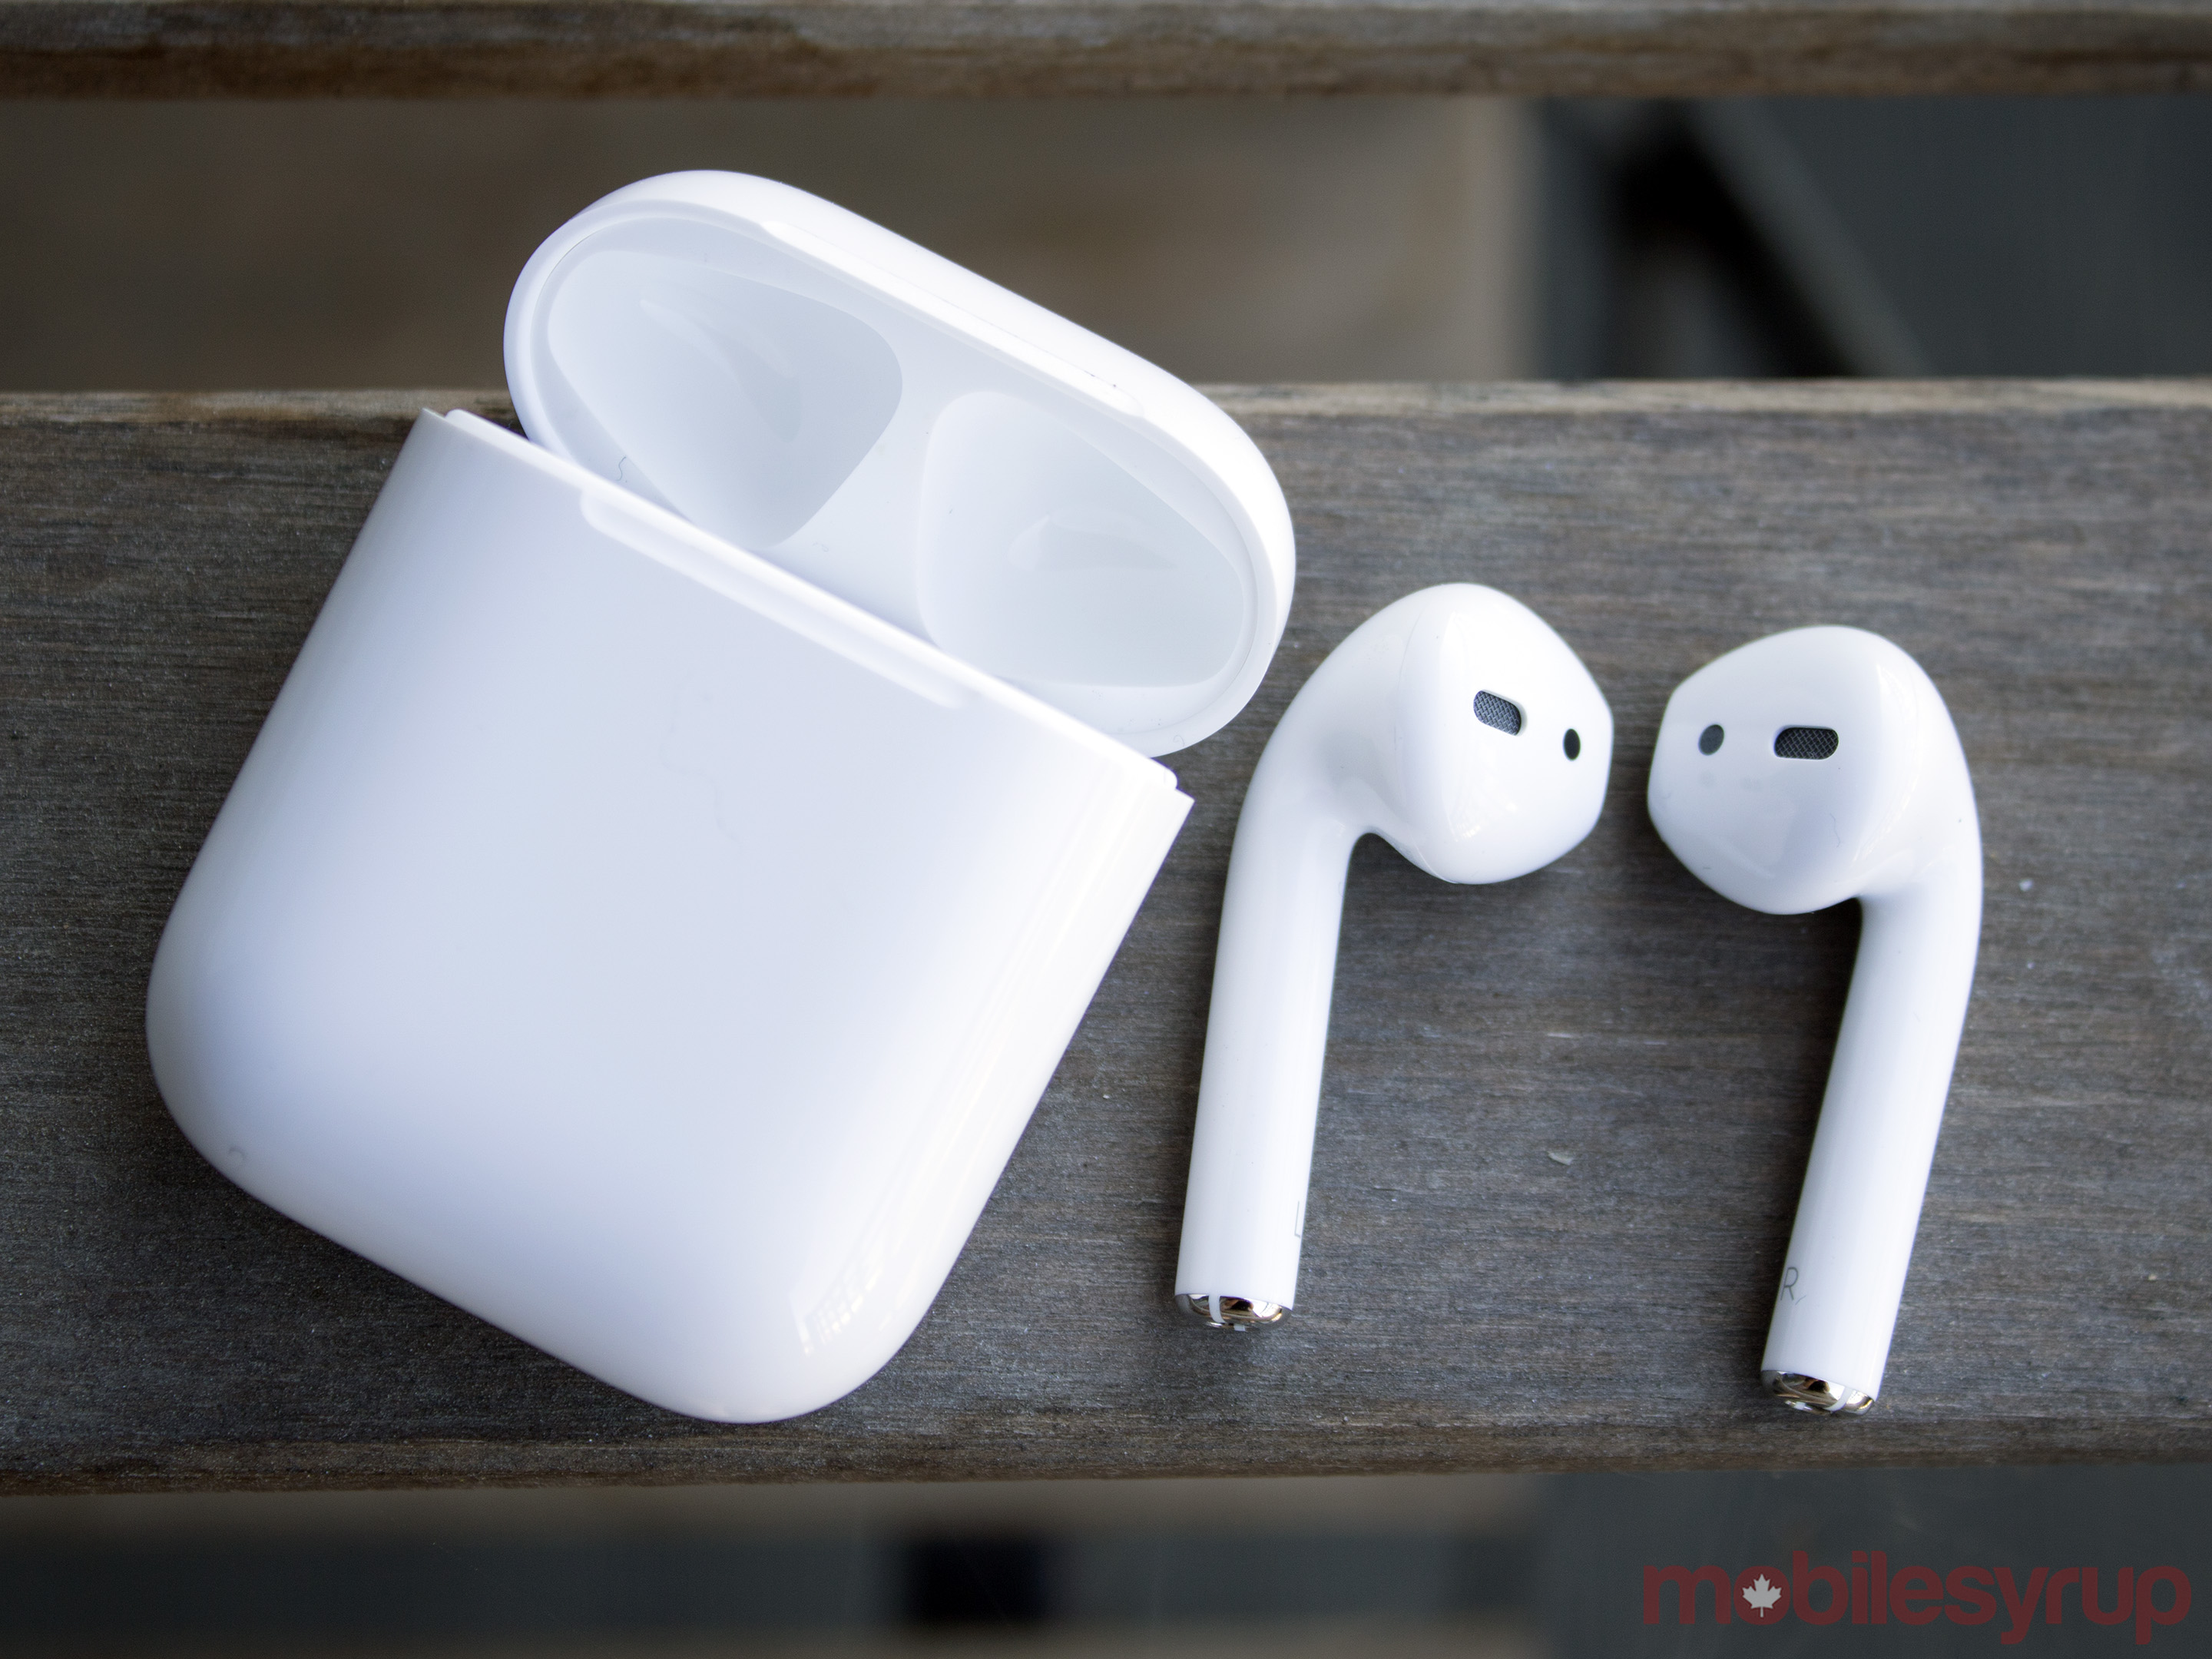 Prelude knude uhøjtidelig AirPods Review: Welcome to the wireless future - MobileSyrup